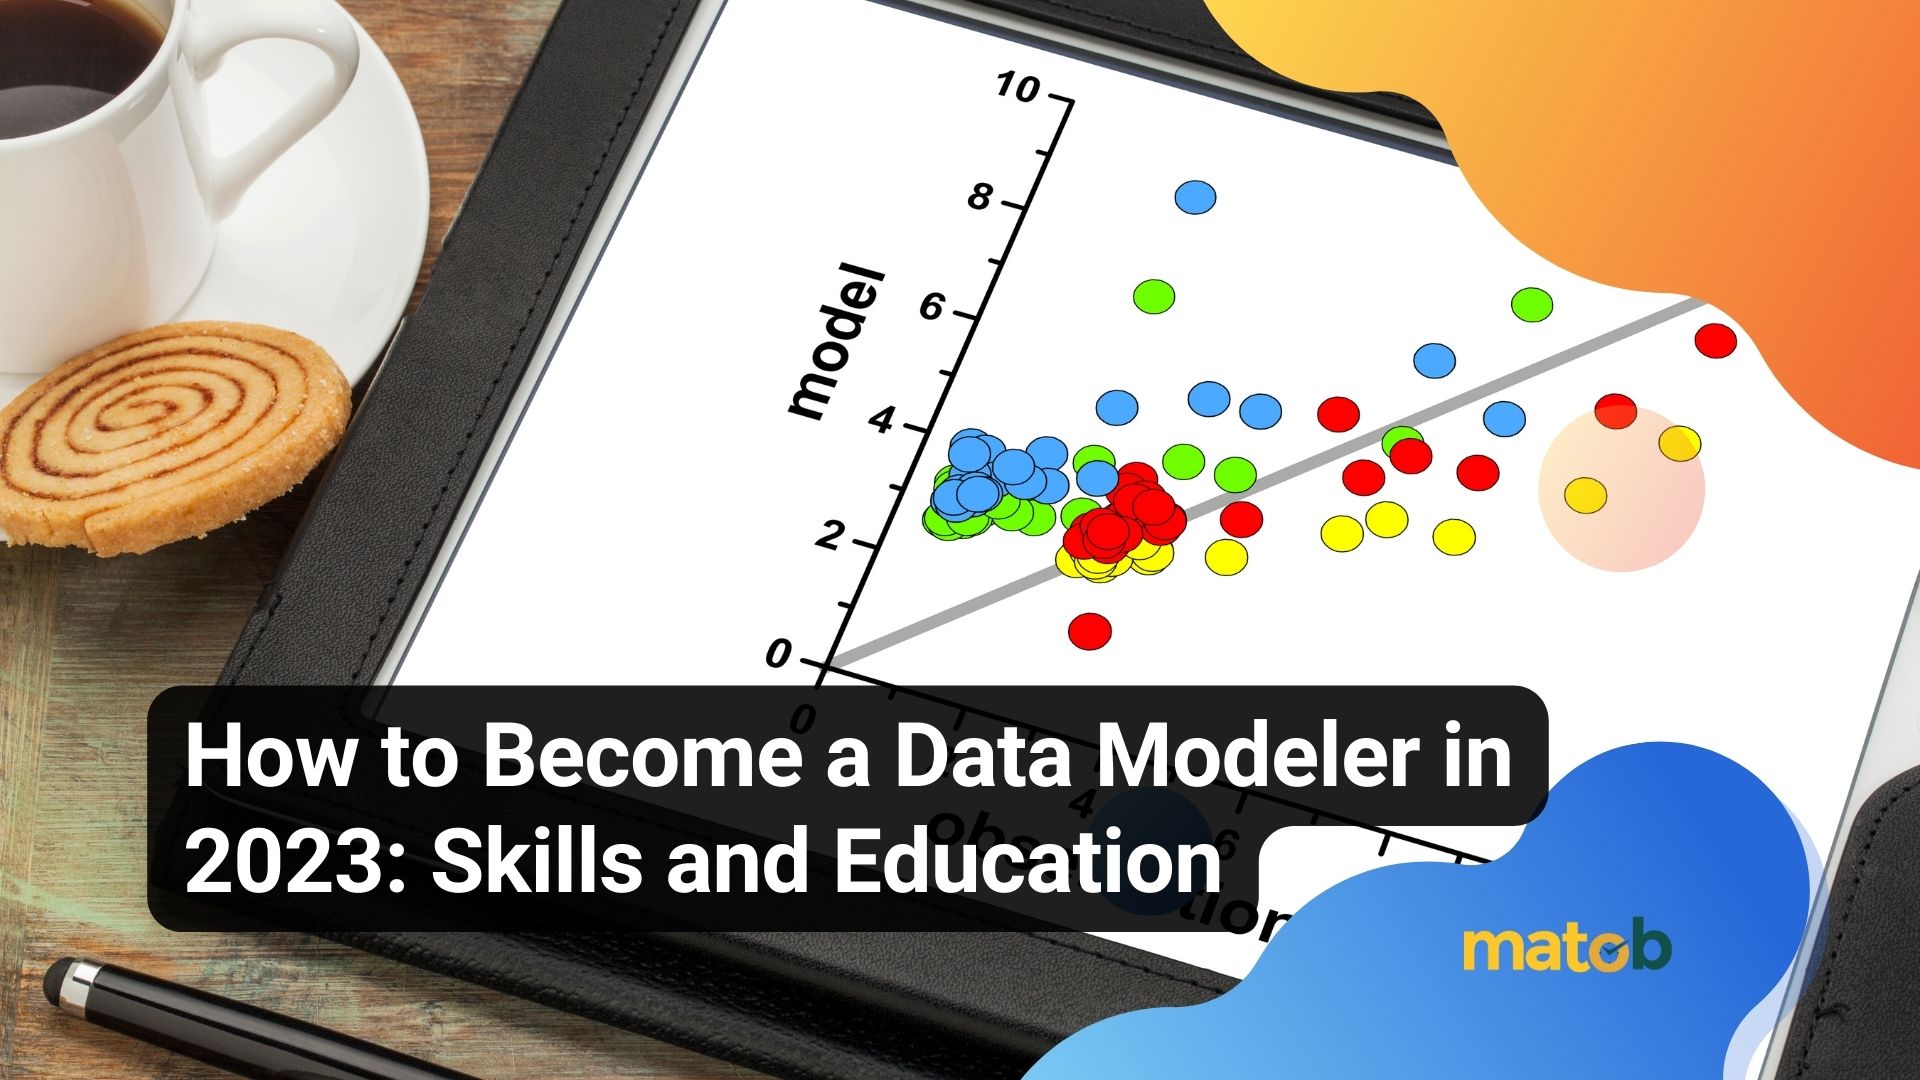 How to Become a Data Modeler in 2023: Skills and Education